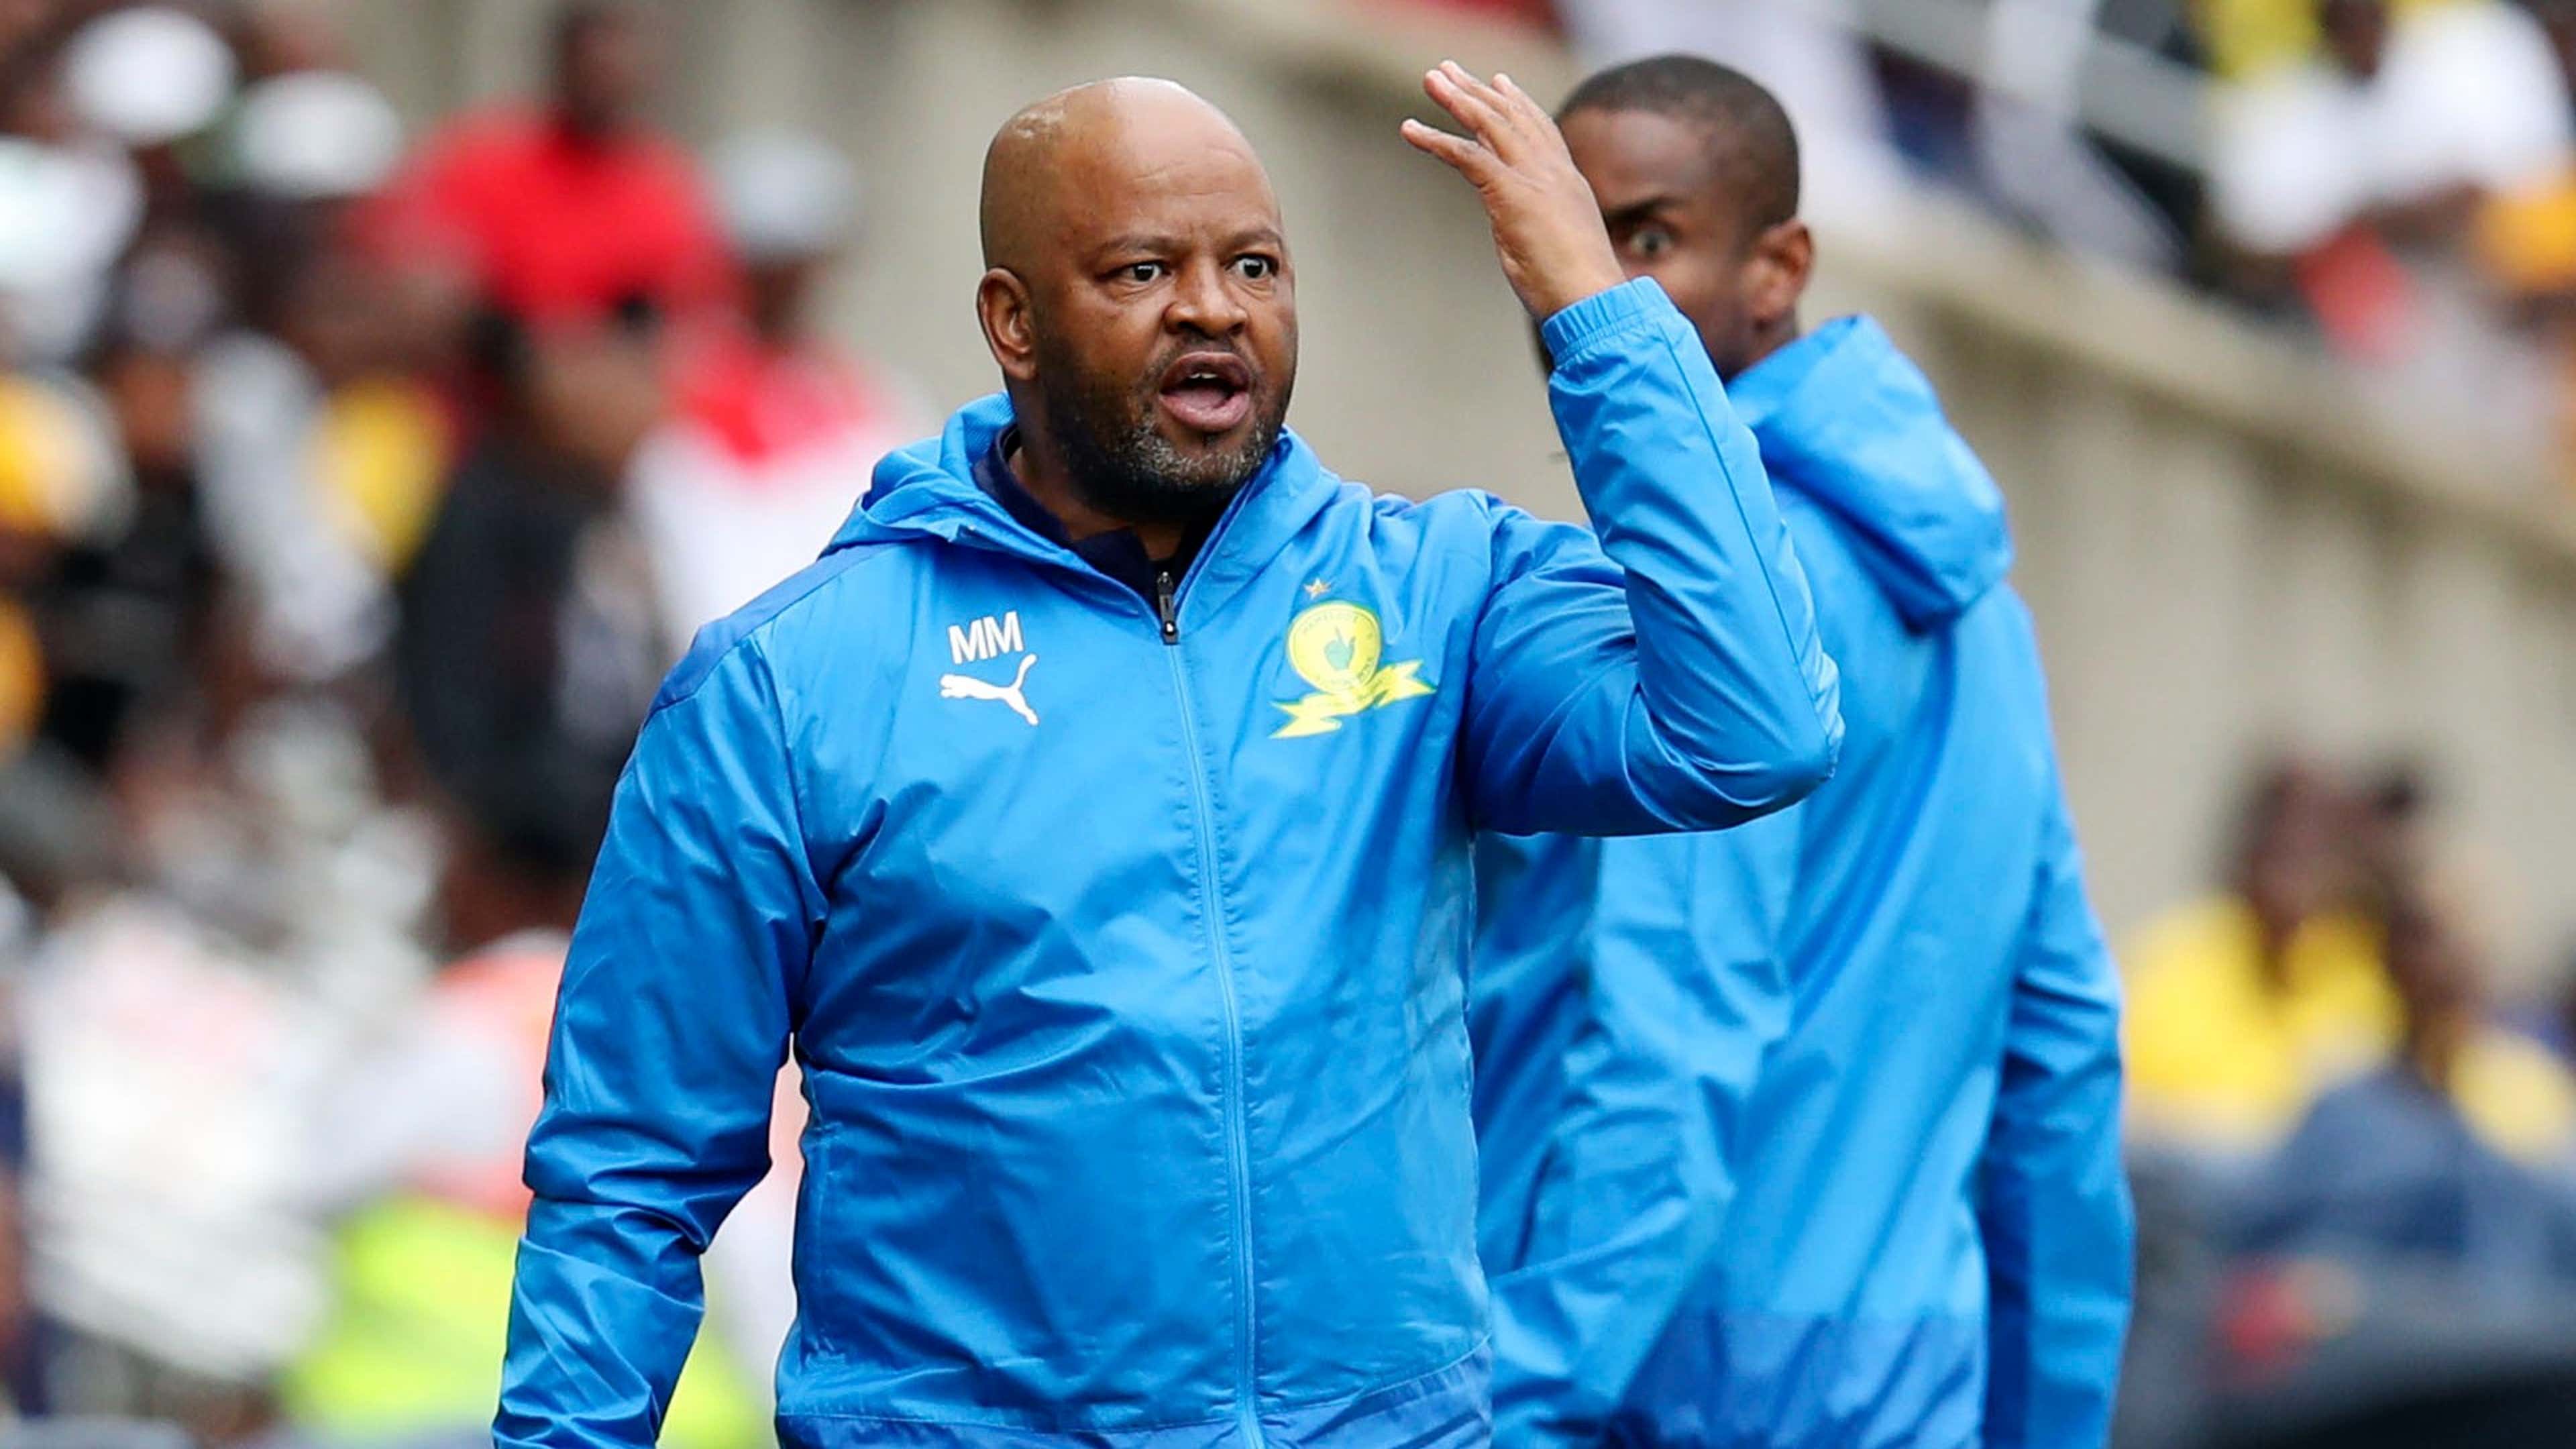 Mamelodi Sundowns assistant coach Mngqithi fires back at Orlando Pirates'  Ncikazi on controversial officiating - 'It's our time to benefit